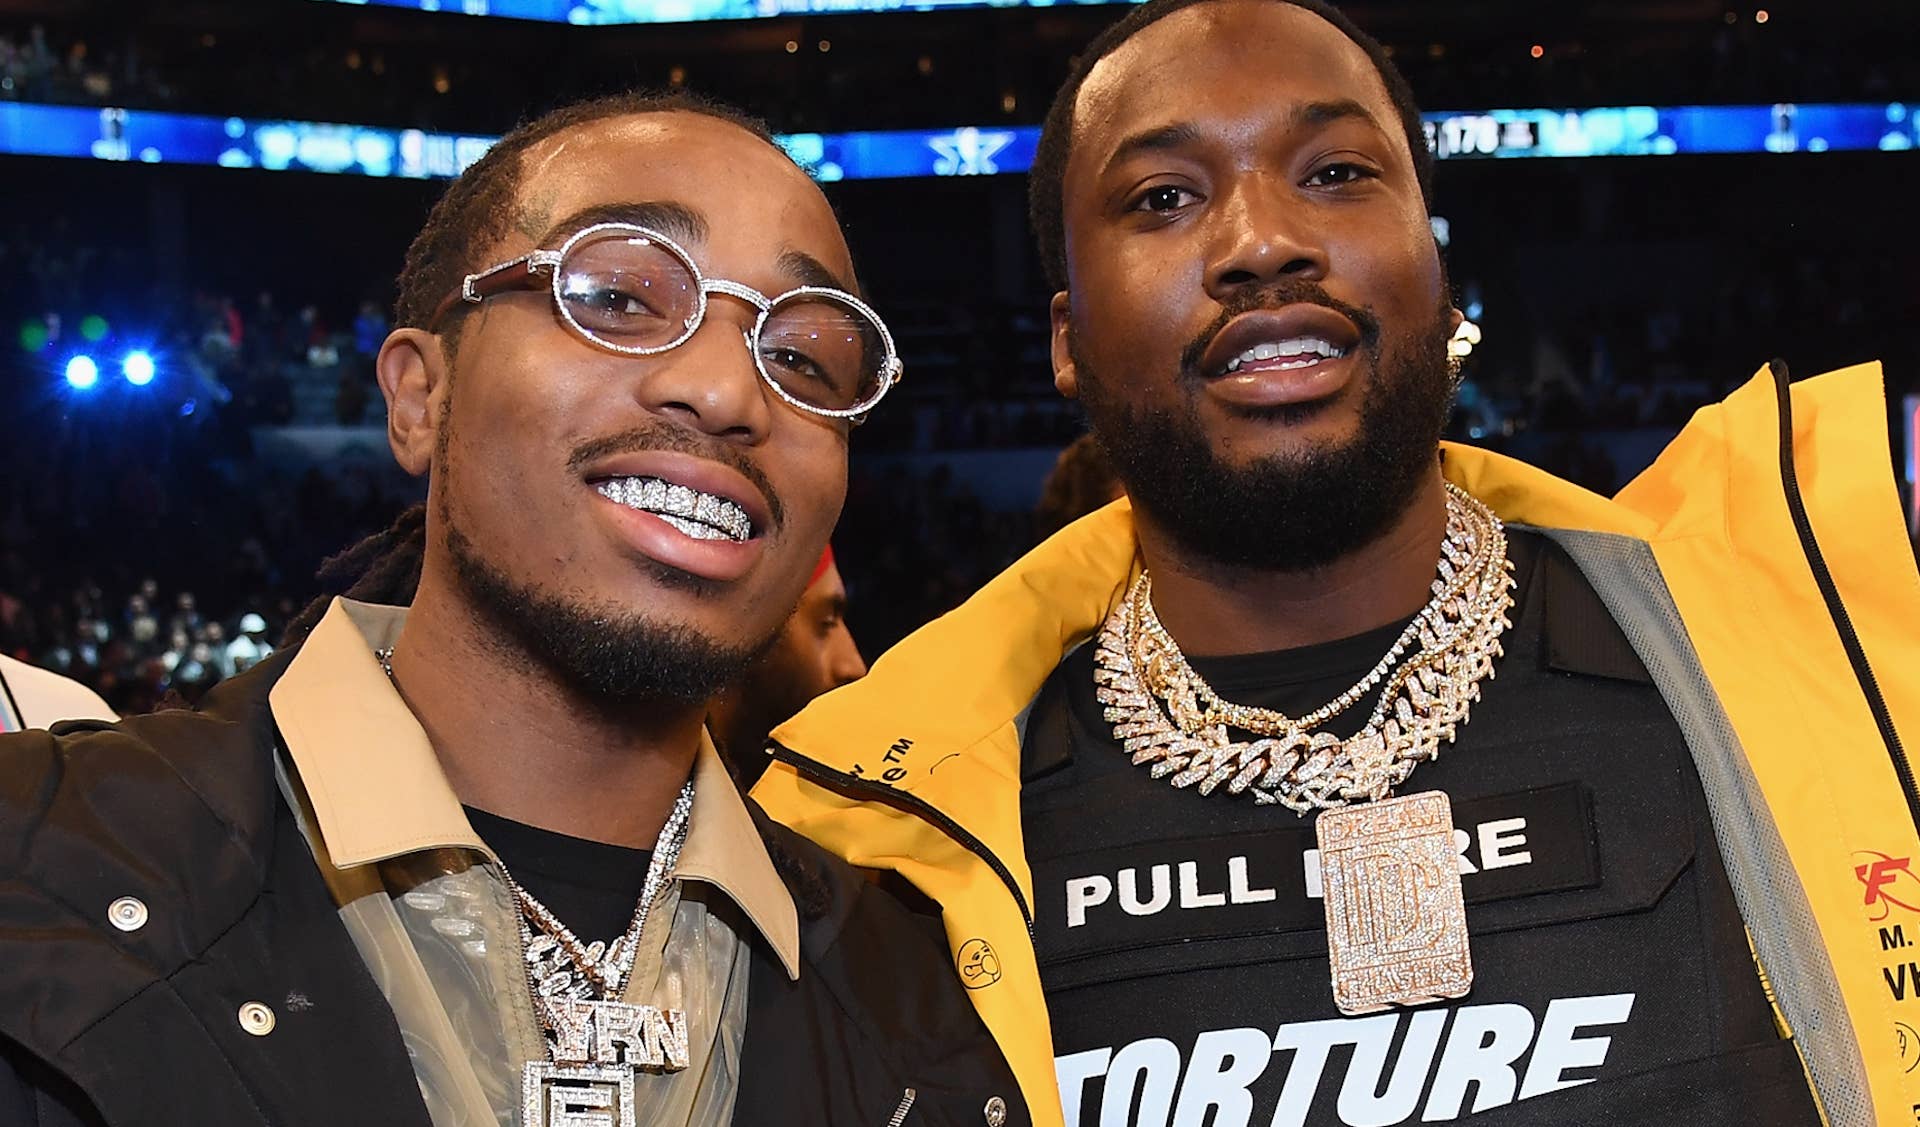 Quavo and Meek Mill